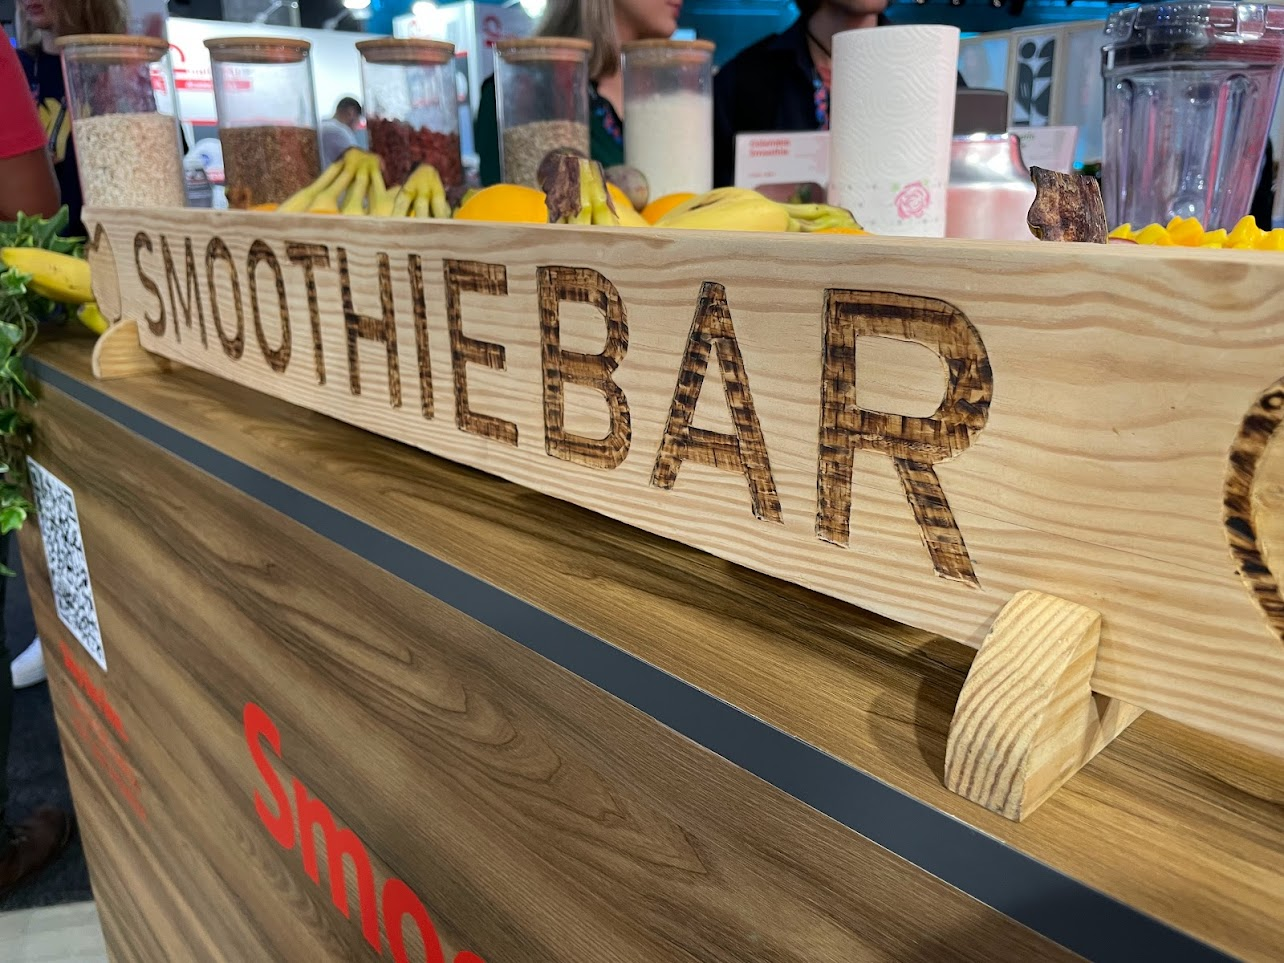 Smoothie Bar with QR code